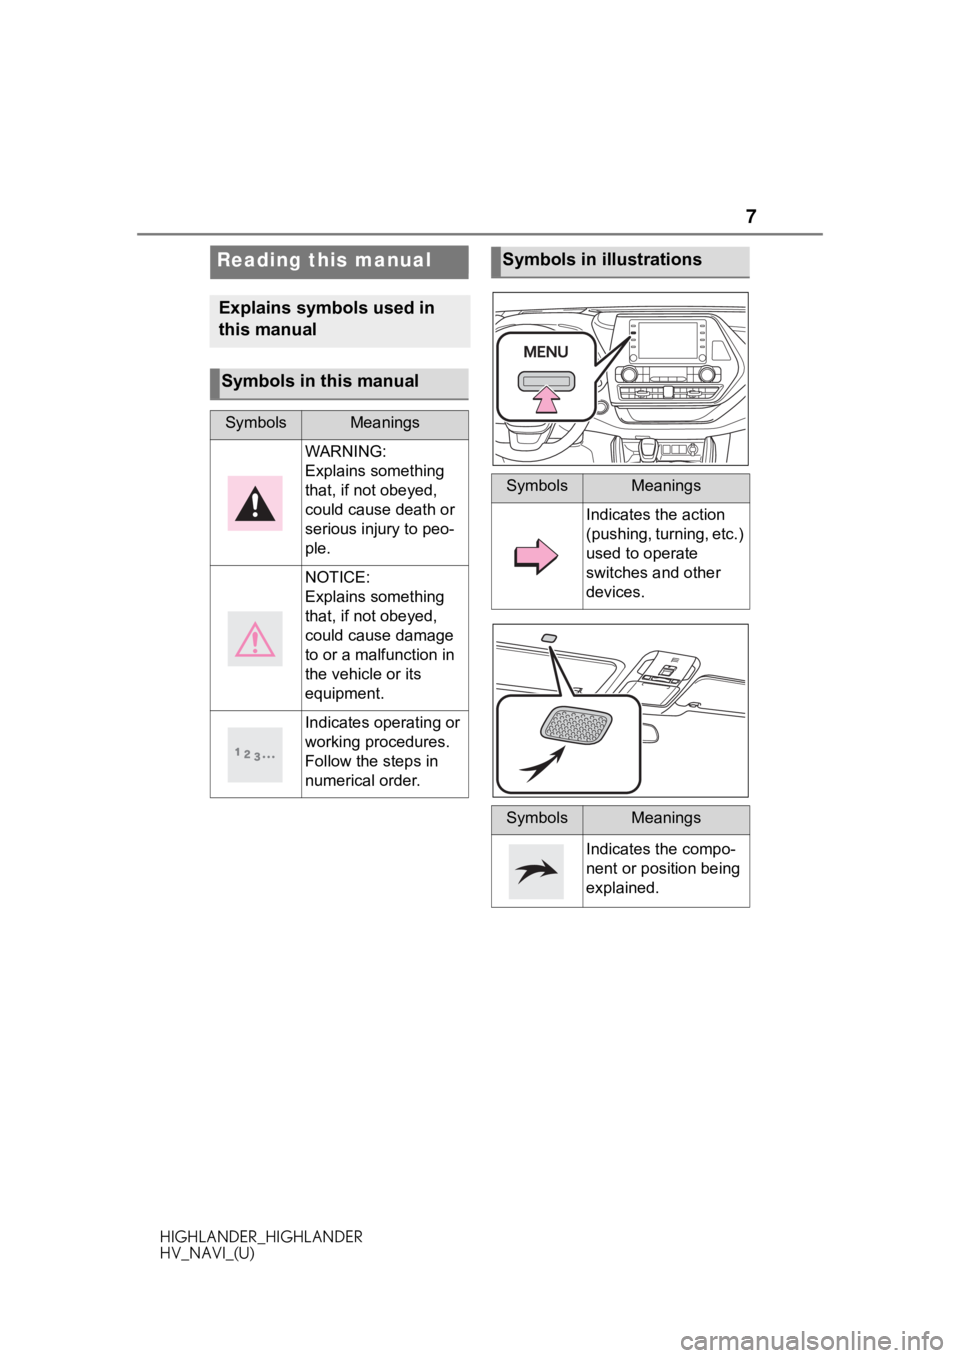 TOYOTA HIGHLANDER HYBRID 2020  Accessories, Audio & Navigation (in English) 7
HIGHLANDER_HIGHLANDER
HV_NAVI_(U)
Reading this manual
Explains symbols used in 
this manual
Symbols in this manual
SymbolsMeanings
WARNING:
Explains something 
that, if not obeyed, 
could cause deat